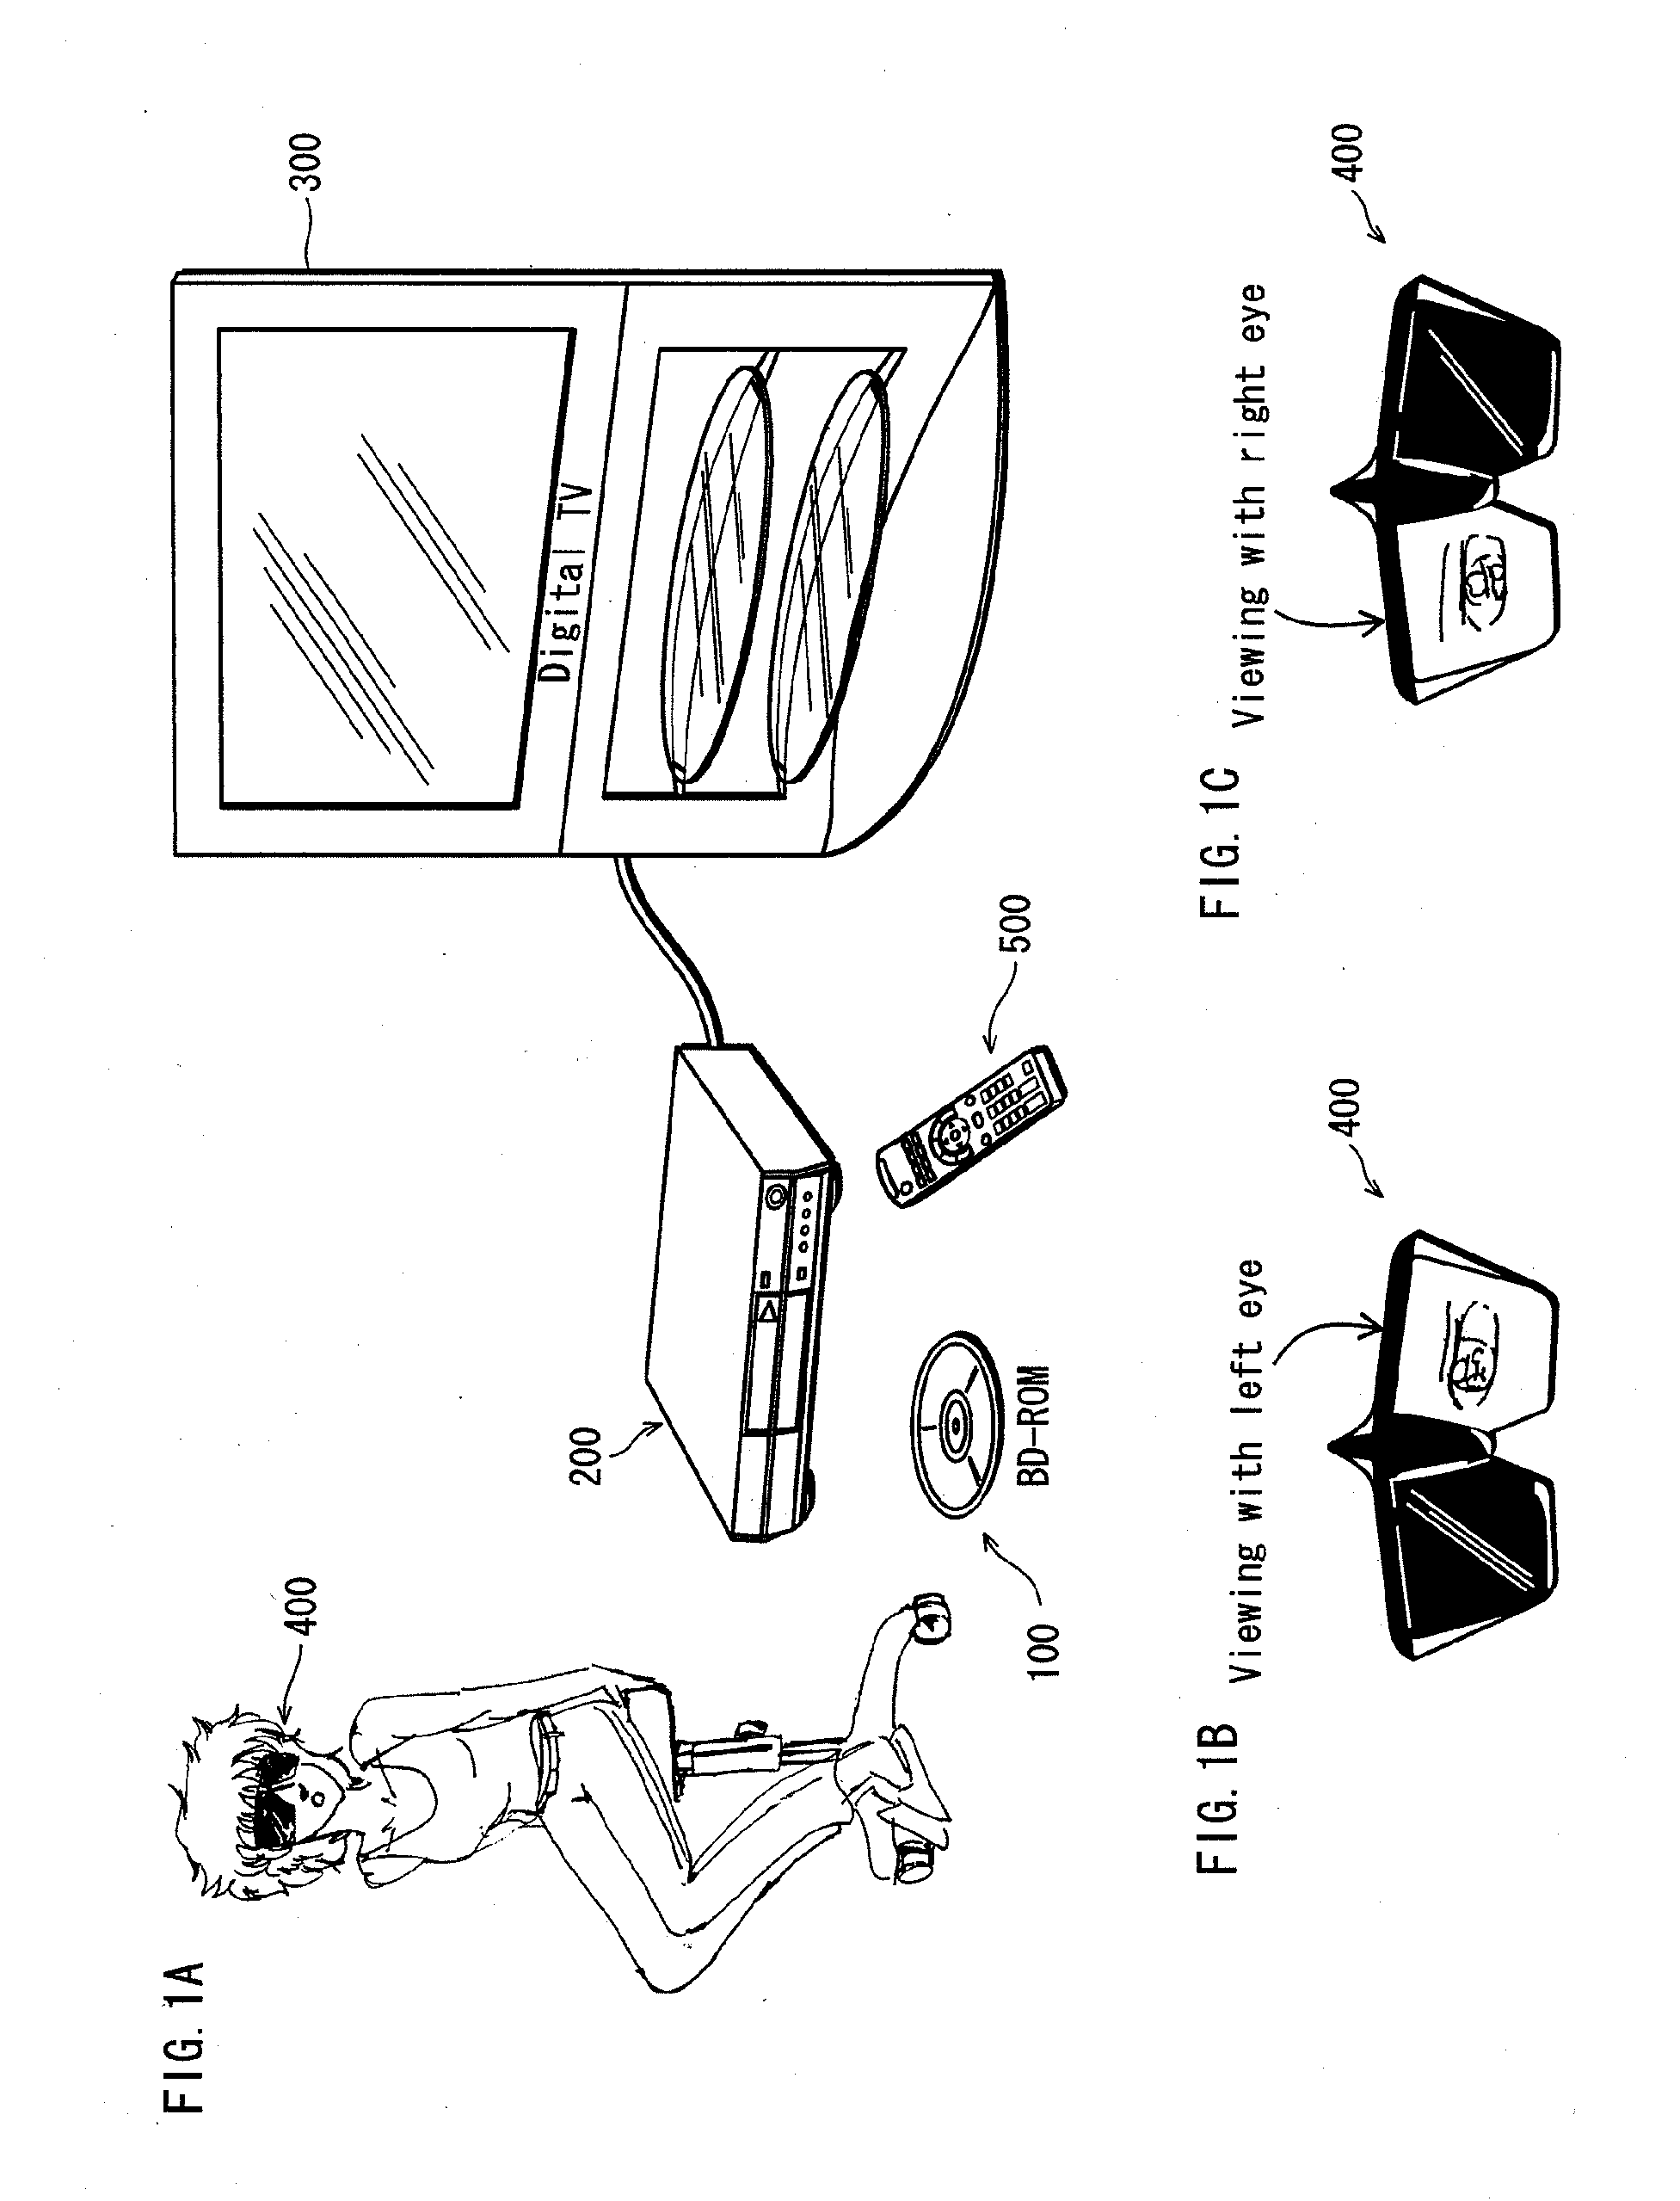 Recording medium, playback device, system lsi, playback method, glasses, and display device for 3D images